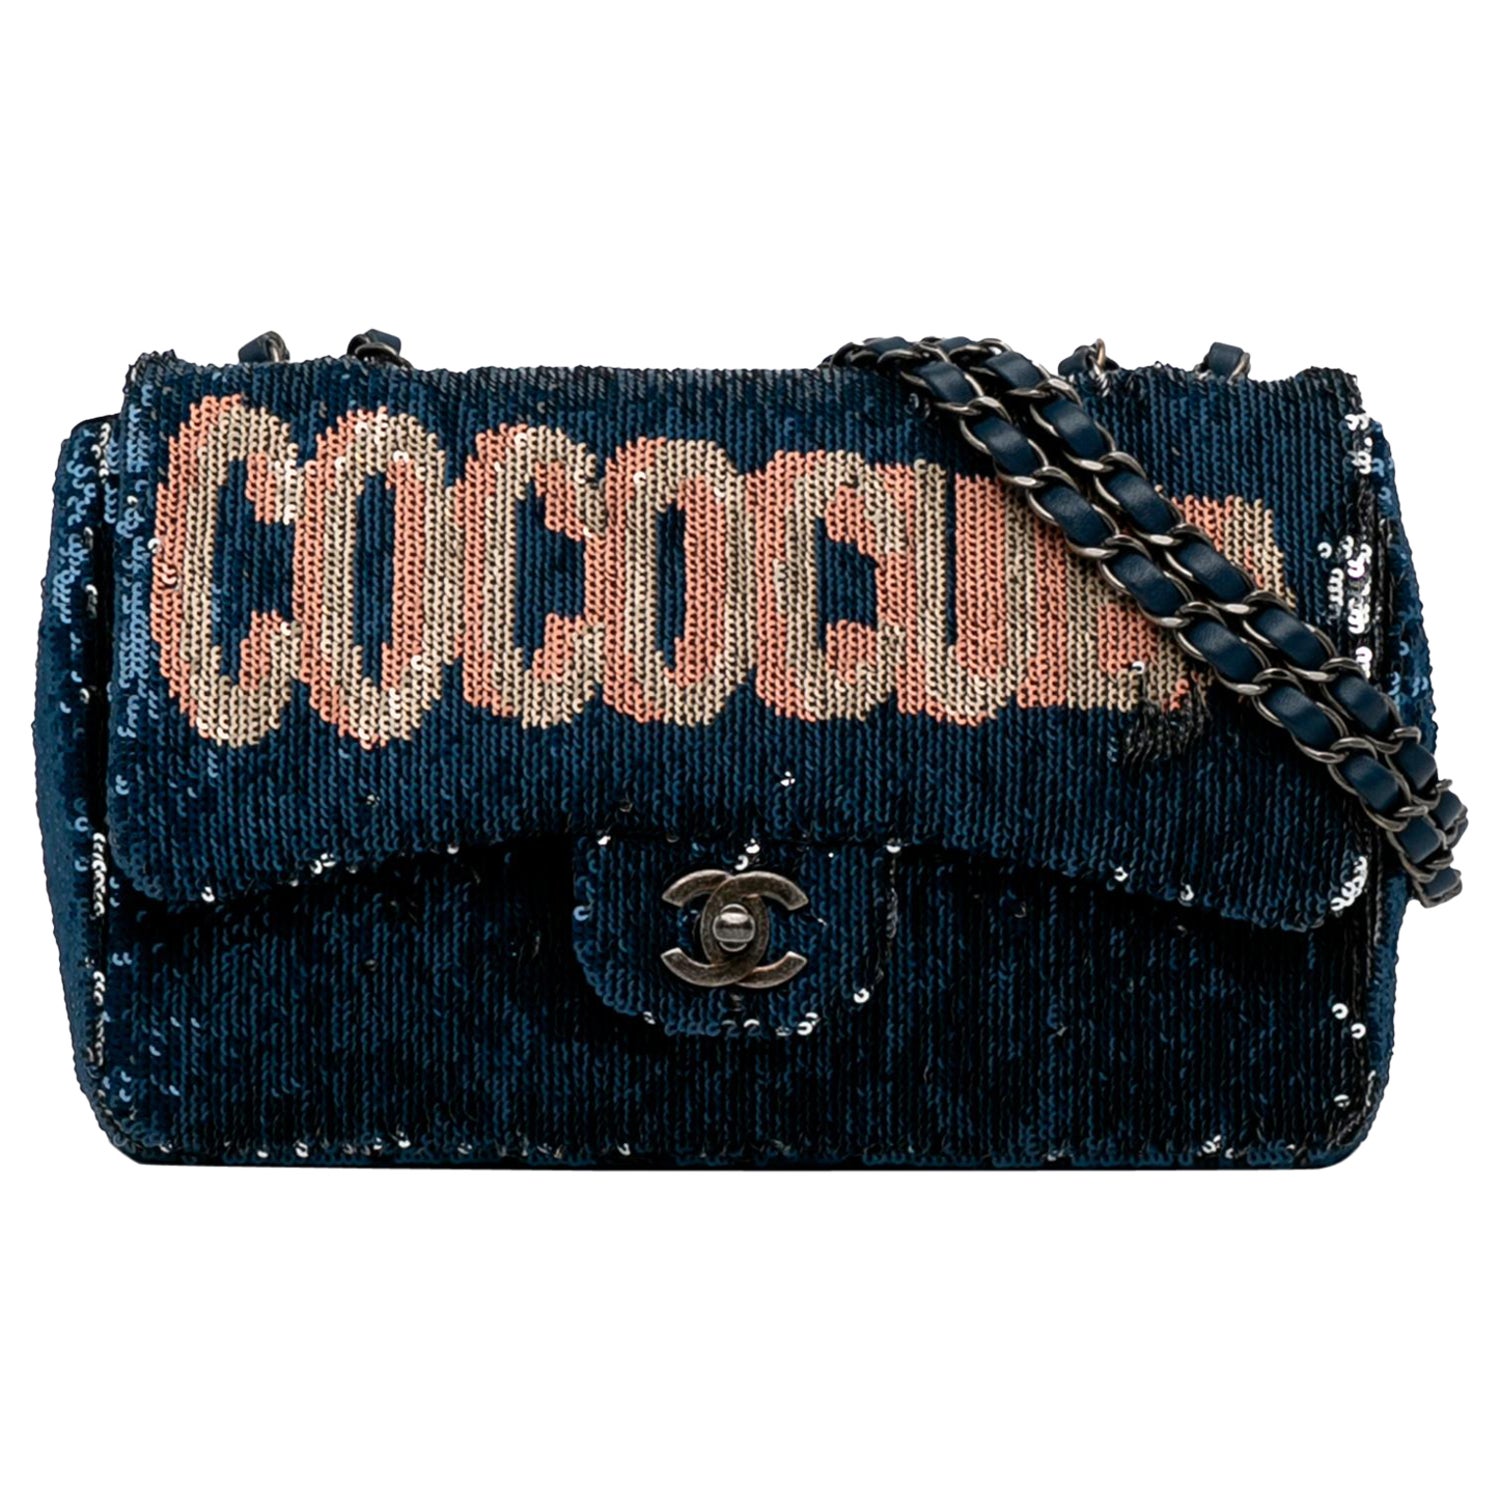 Chanel Cuba Cruise - 11 For Sale on 1stDibs